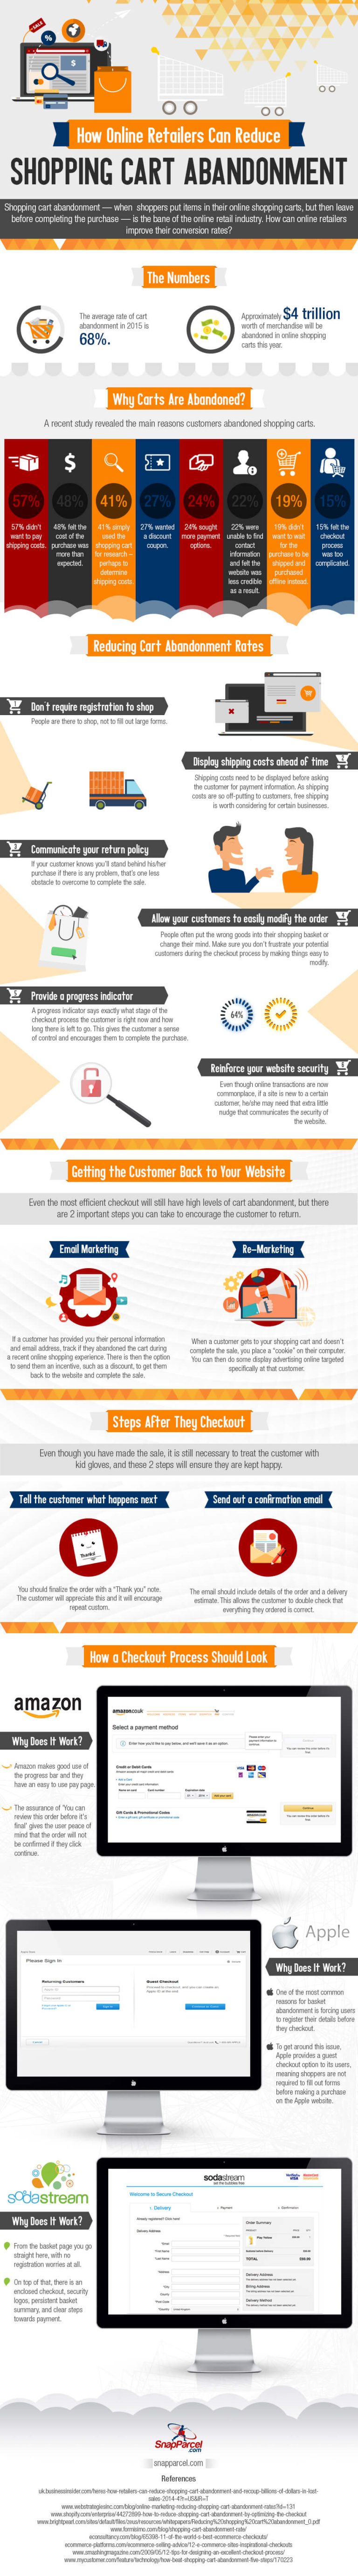 [Infographic] How to Reduce Shopping Cart Abandonment